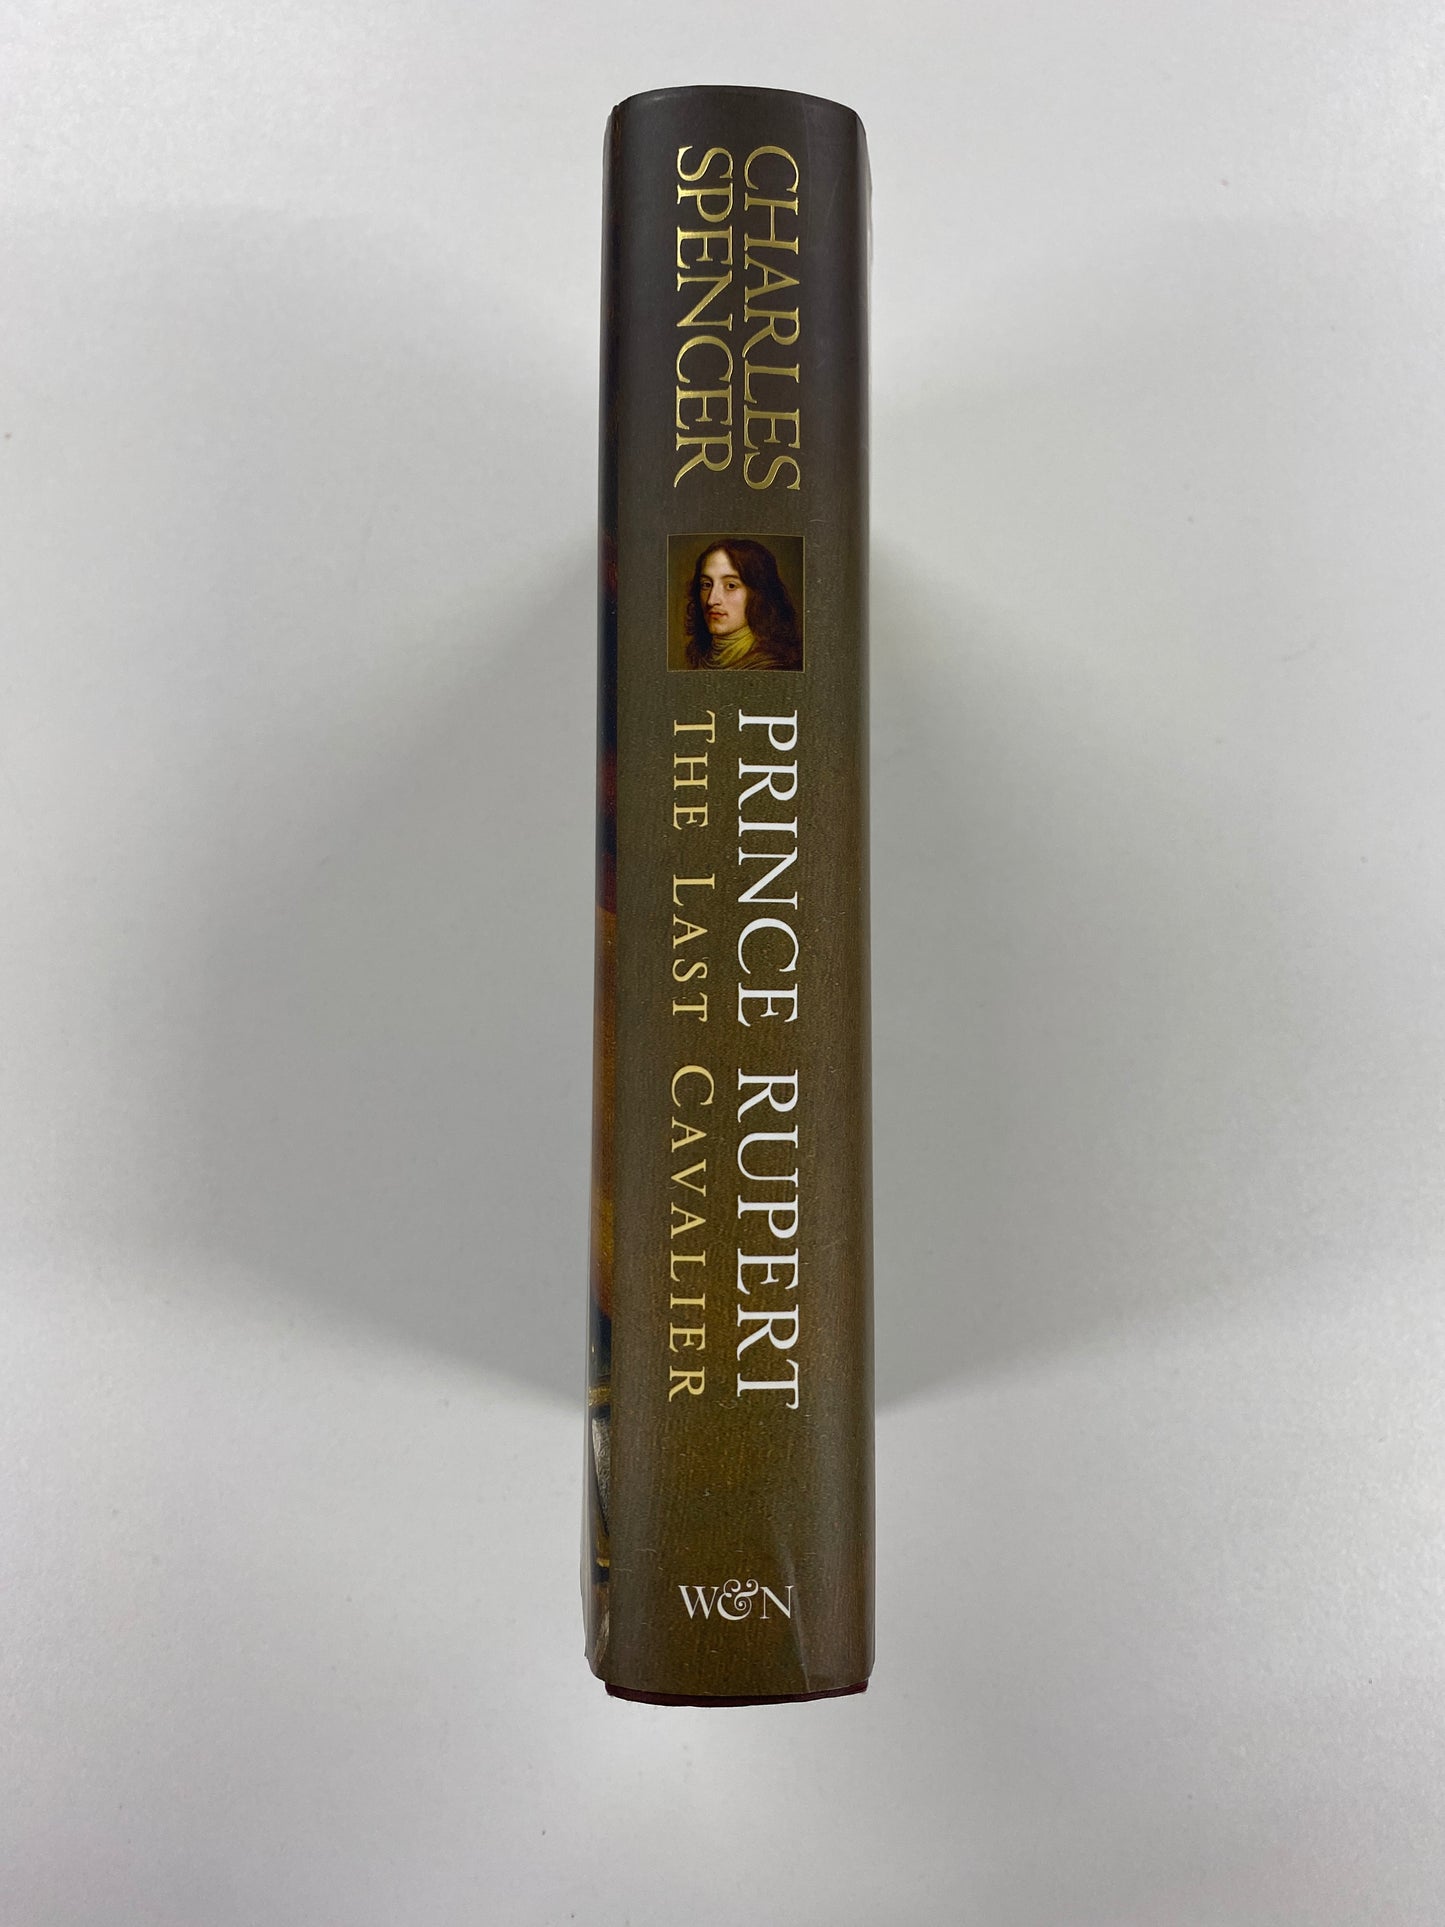 Prince Rupert: The Last Cavalier, Charles Spencer, Weidenfeld and Nicolson, 2007 First Edition (Signed)